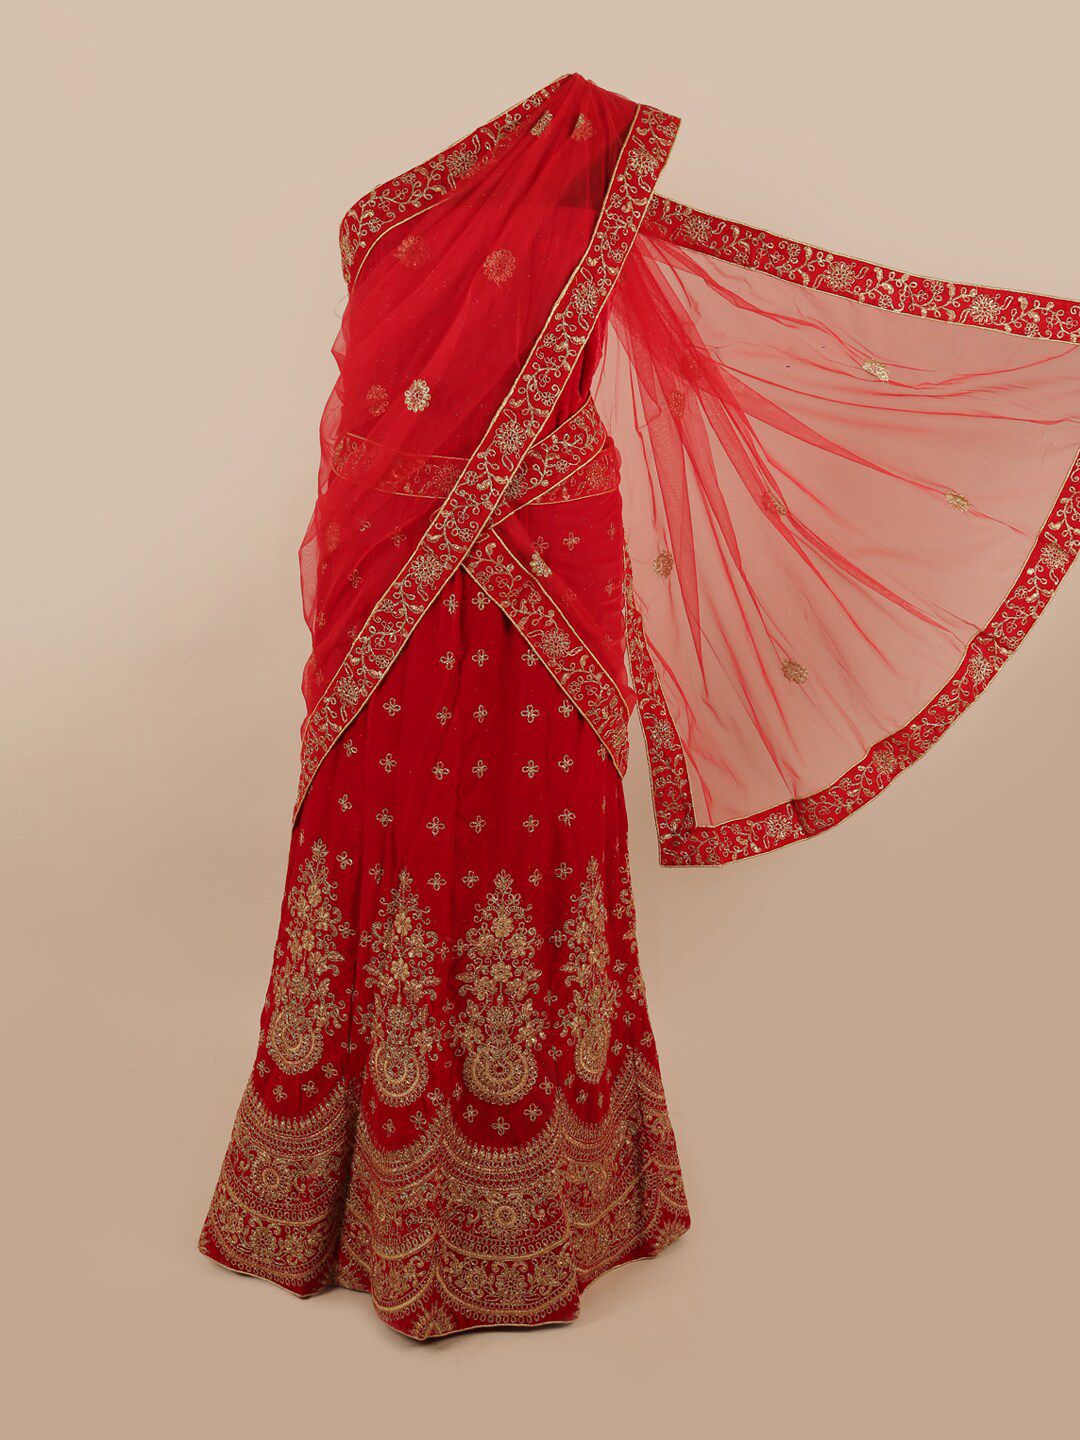 Pothys Red & Gold-Toned Embroidered Unstitched Lehenga & Blouse With Dupatta Price in India